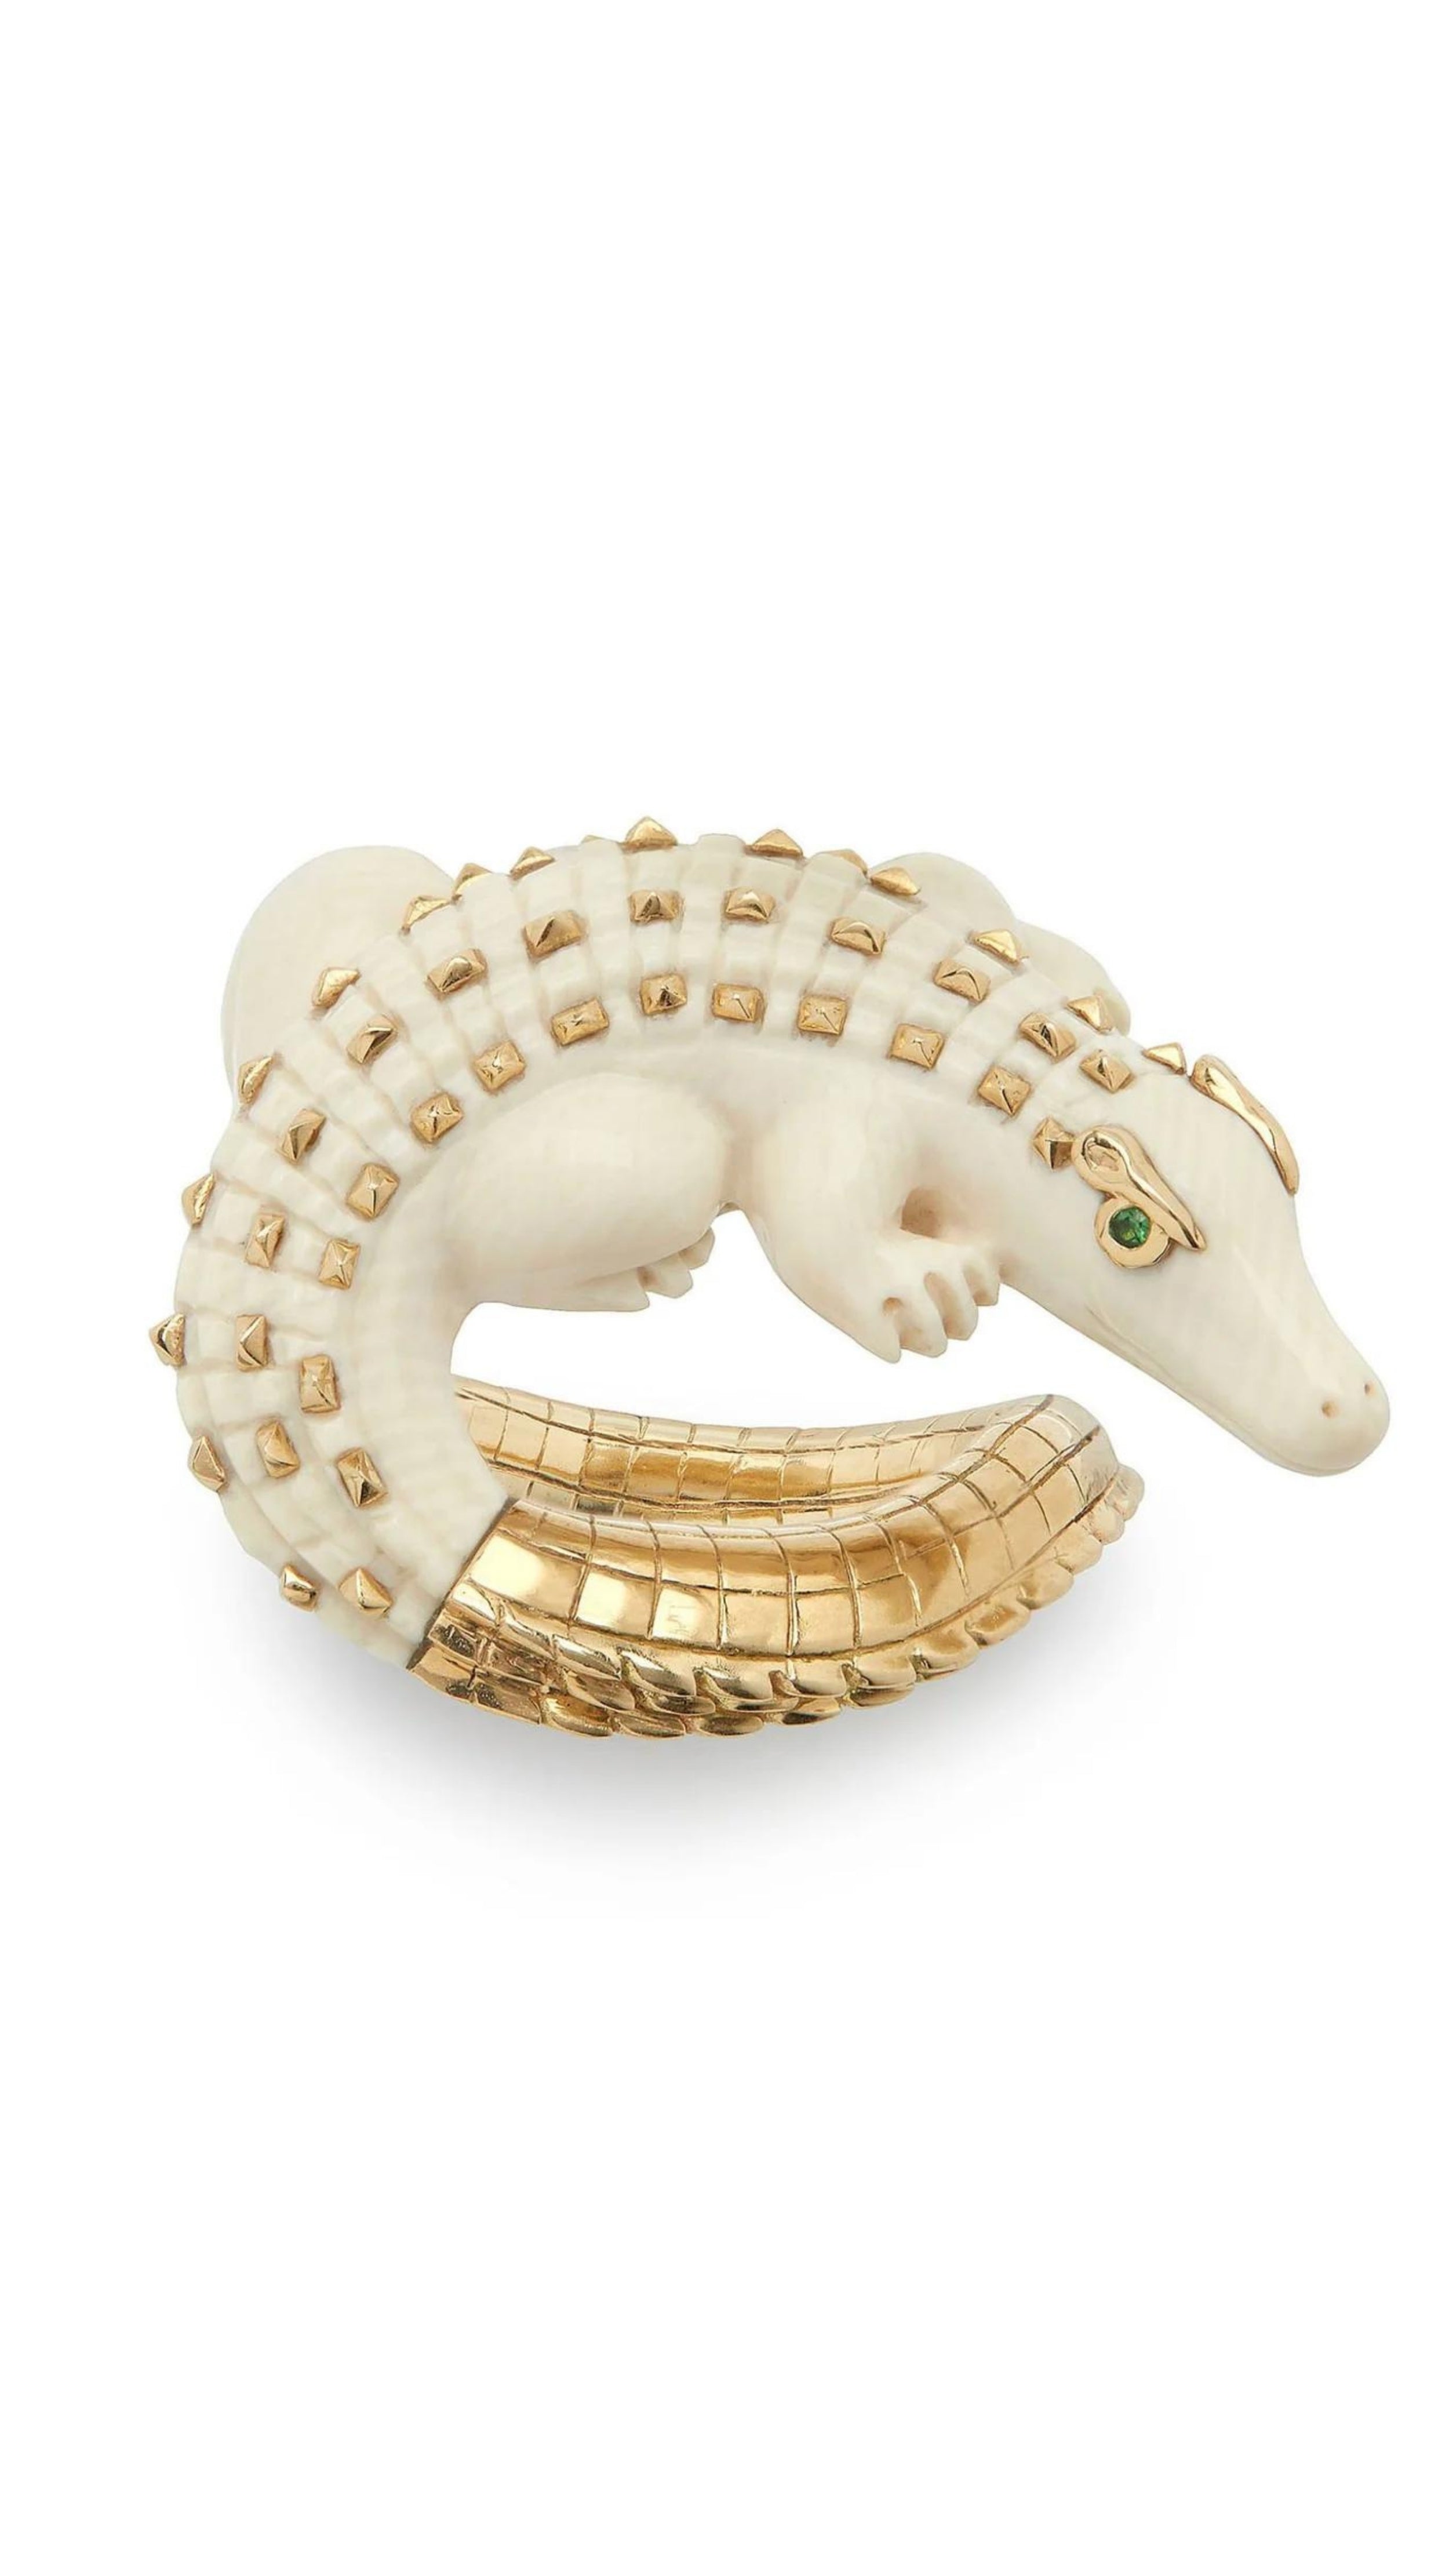 Bibi van der Velden Mammoth Alligator Twist Ring. Crafted in mamoth tusk in the shape of an alligator that curves around the finger. The tail is made from 18K gold and the ivory body has 18K gold studs. The ring is shown from above.